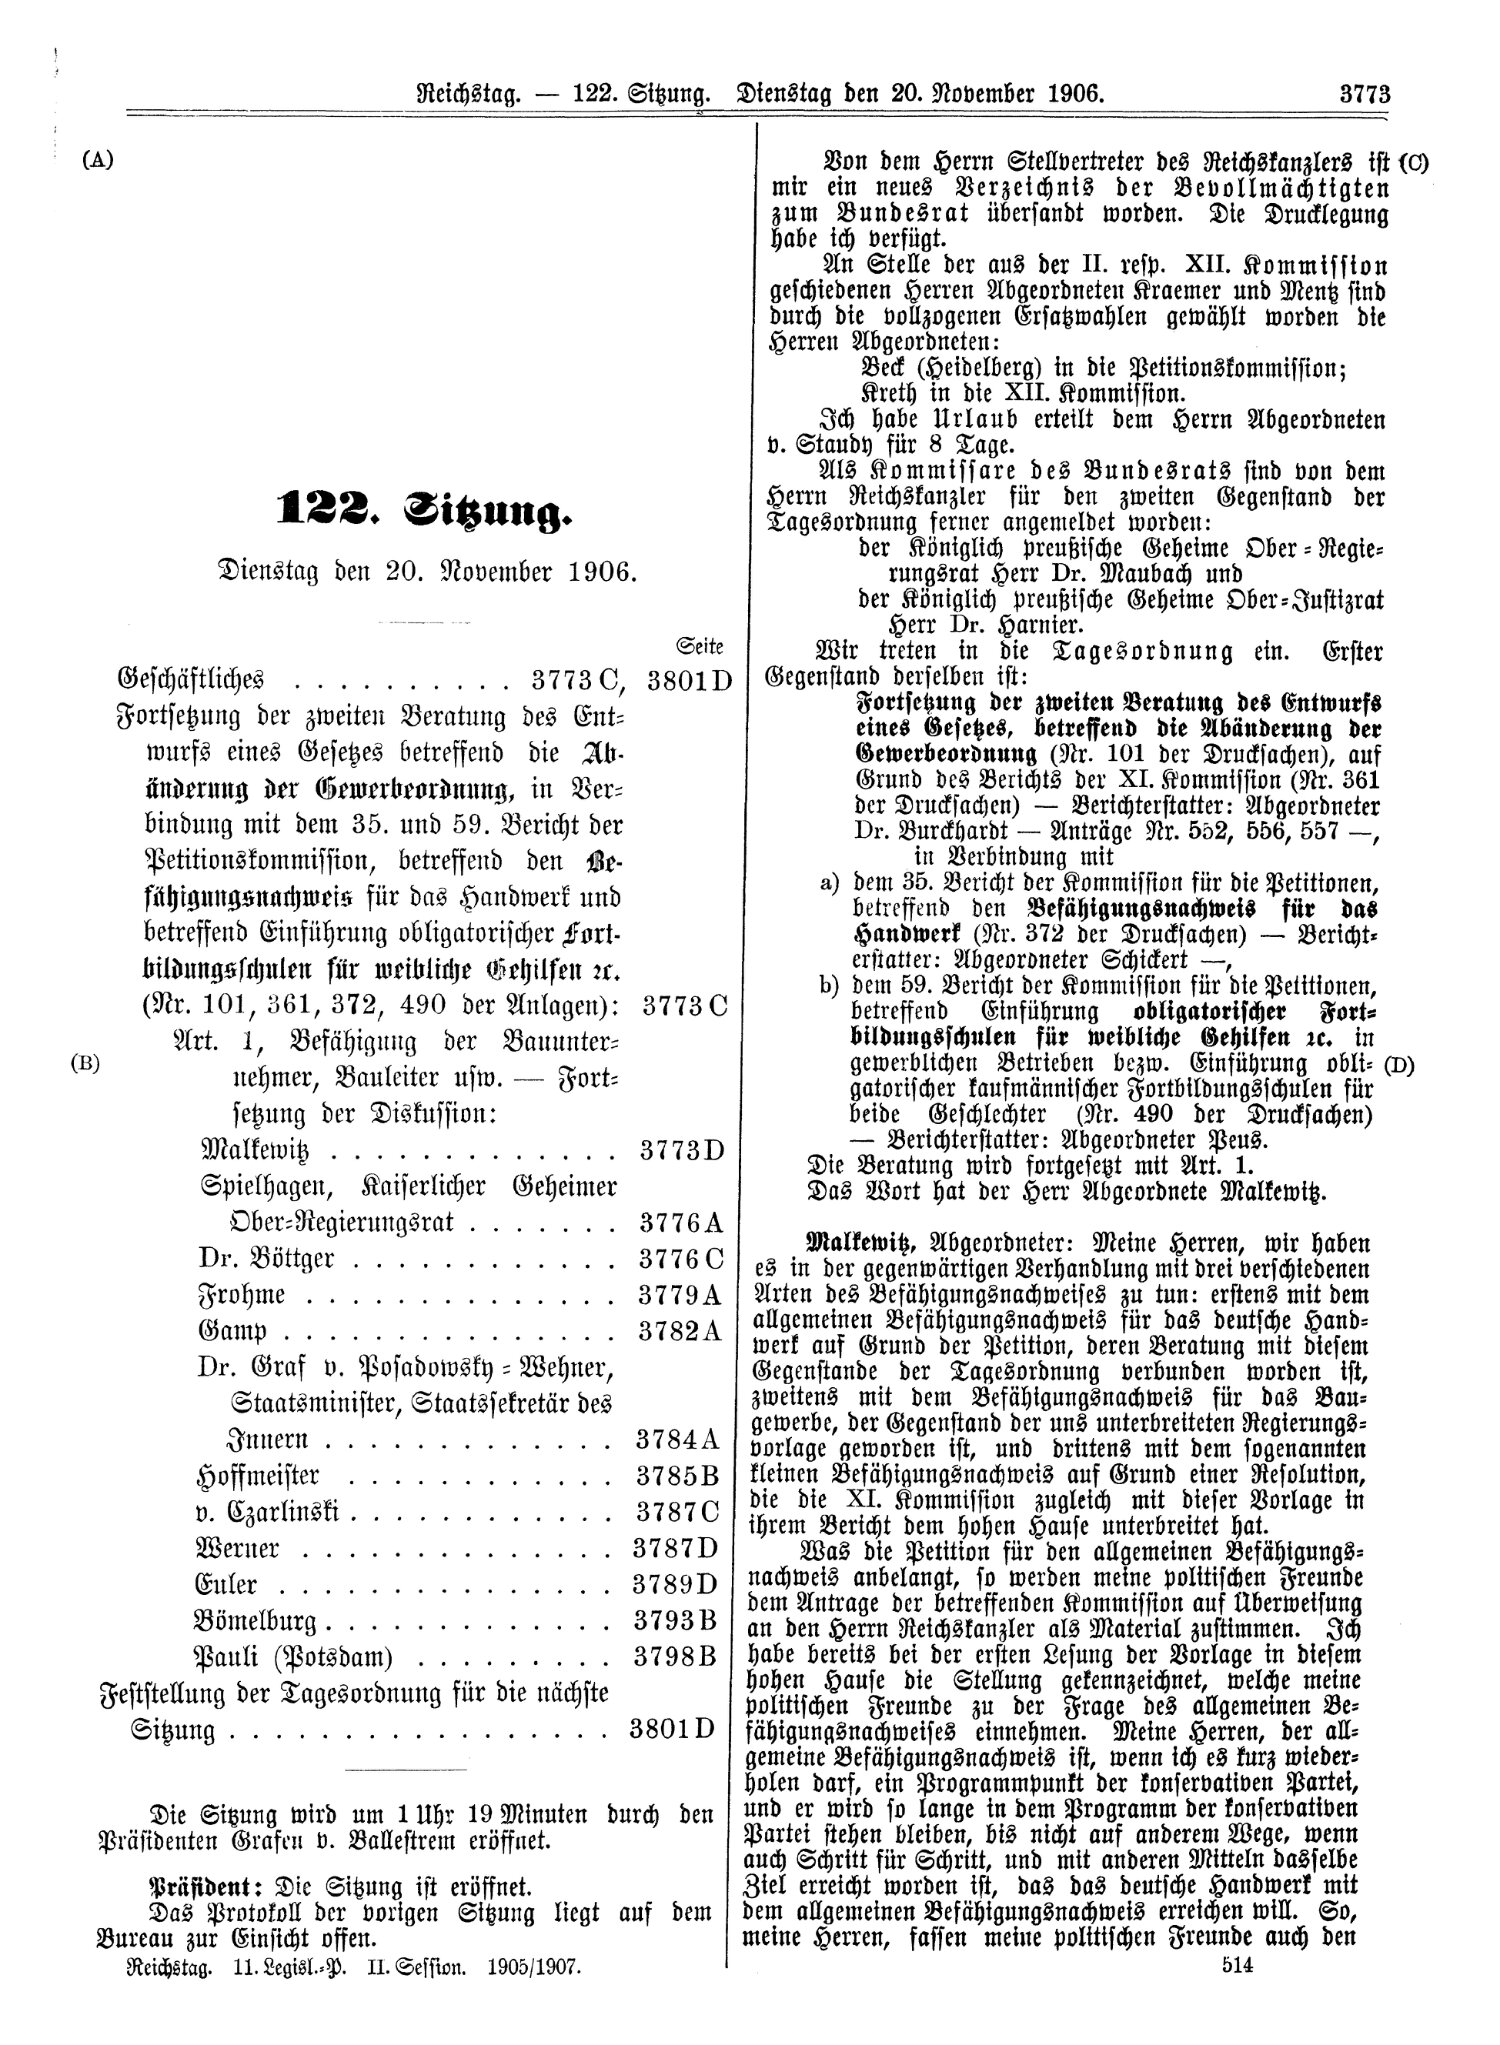 Scan of page 3773